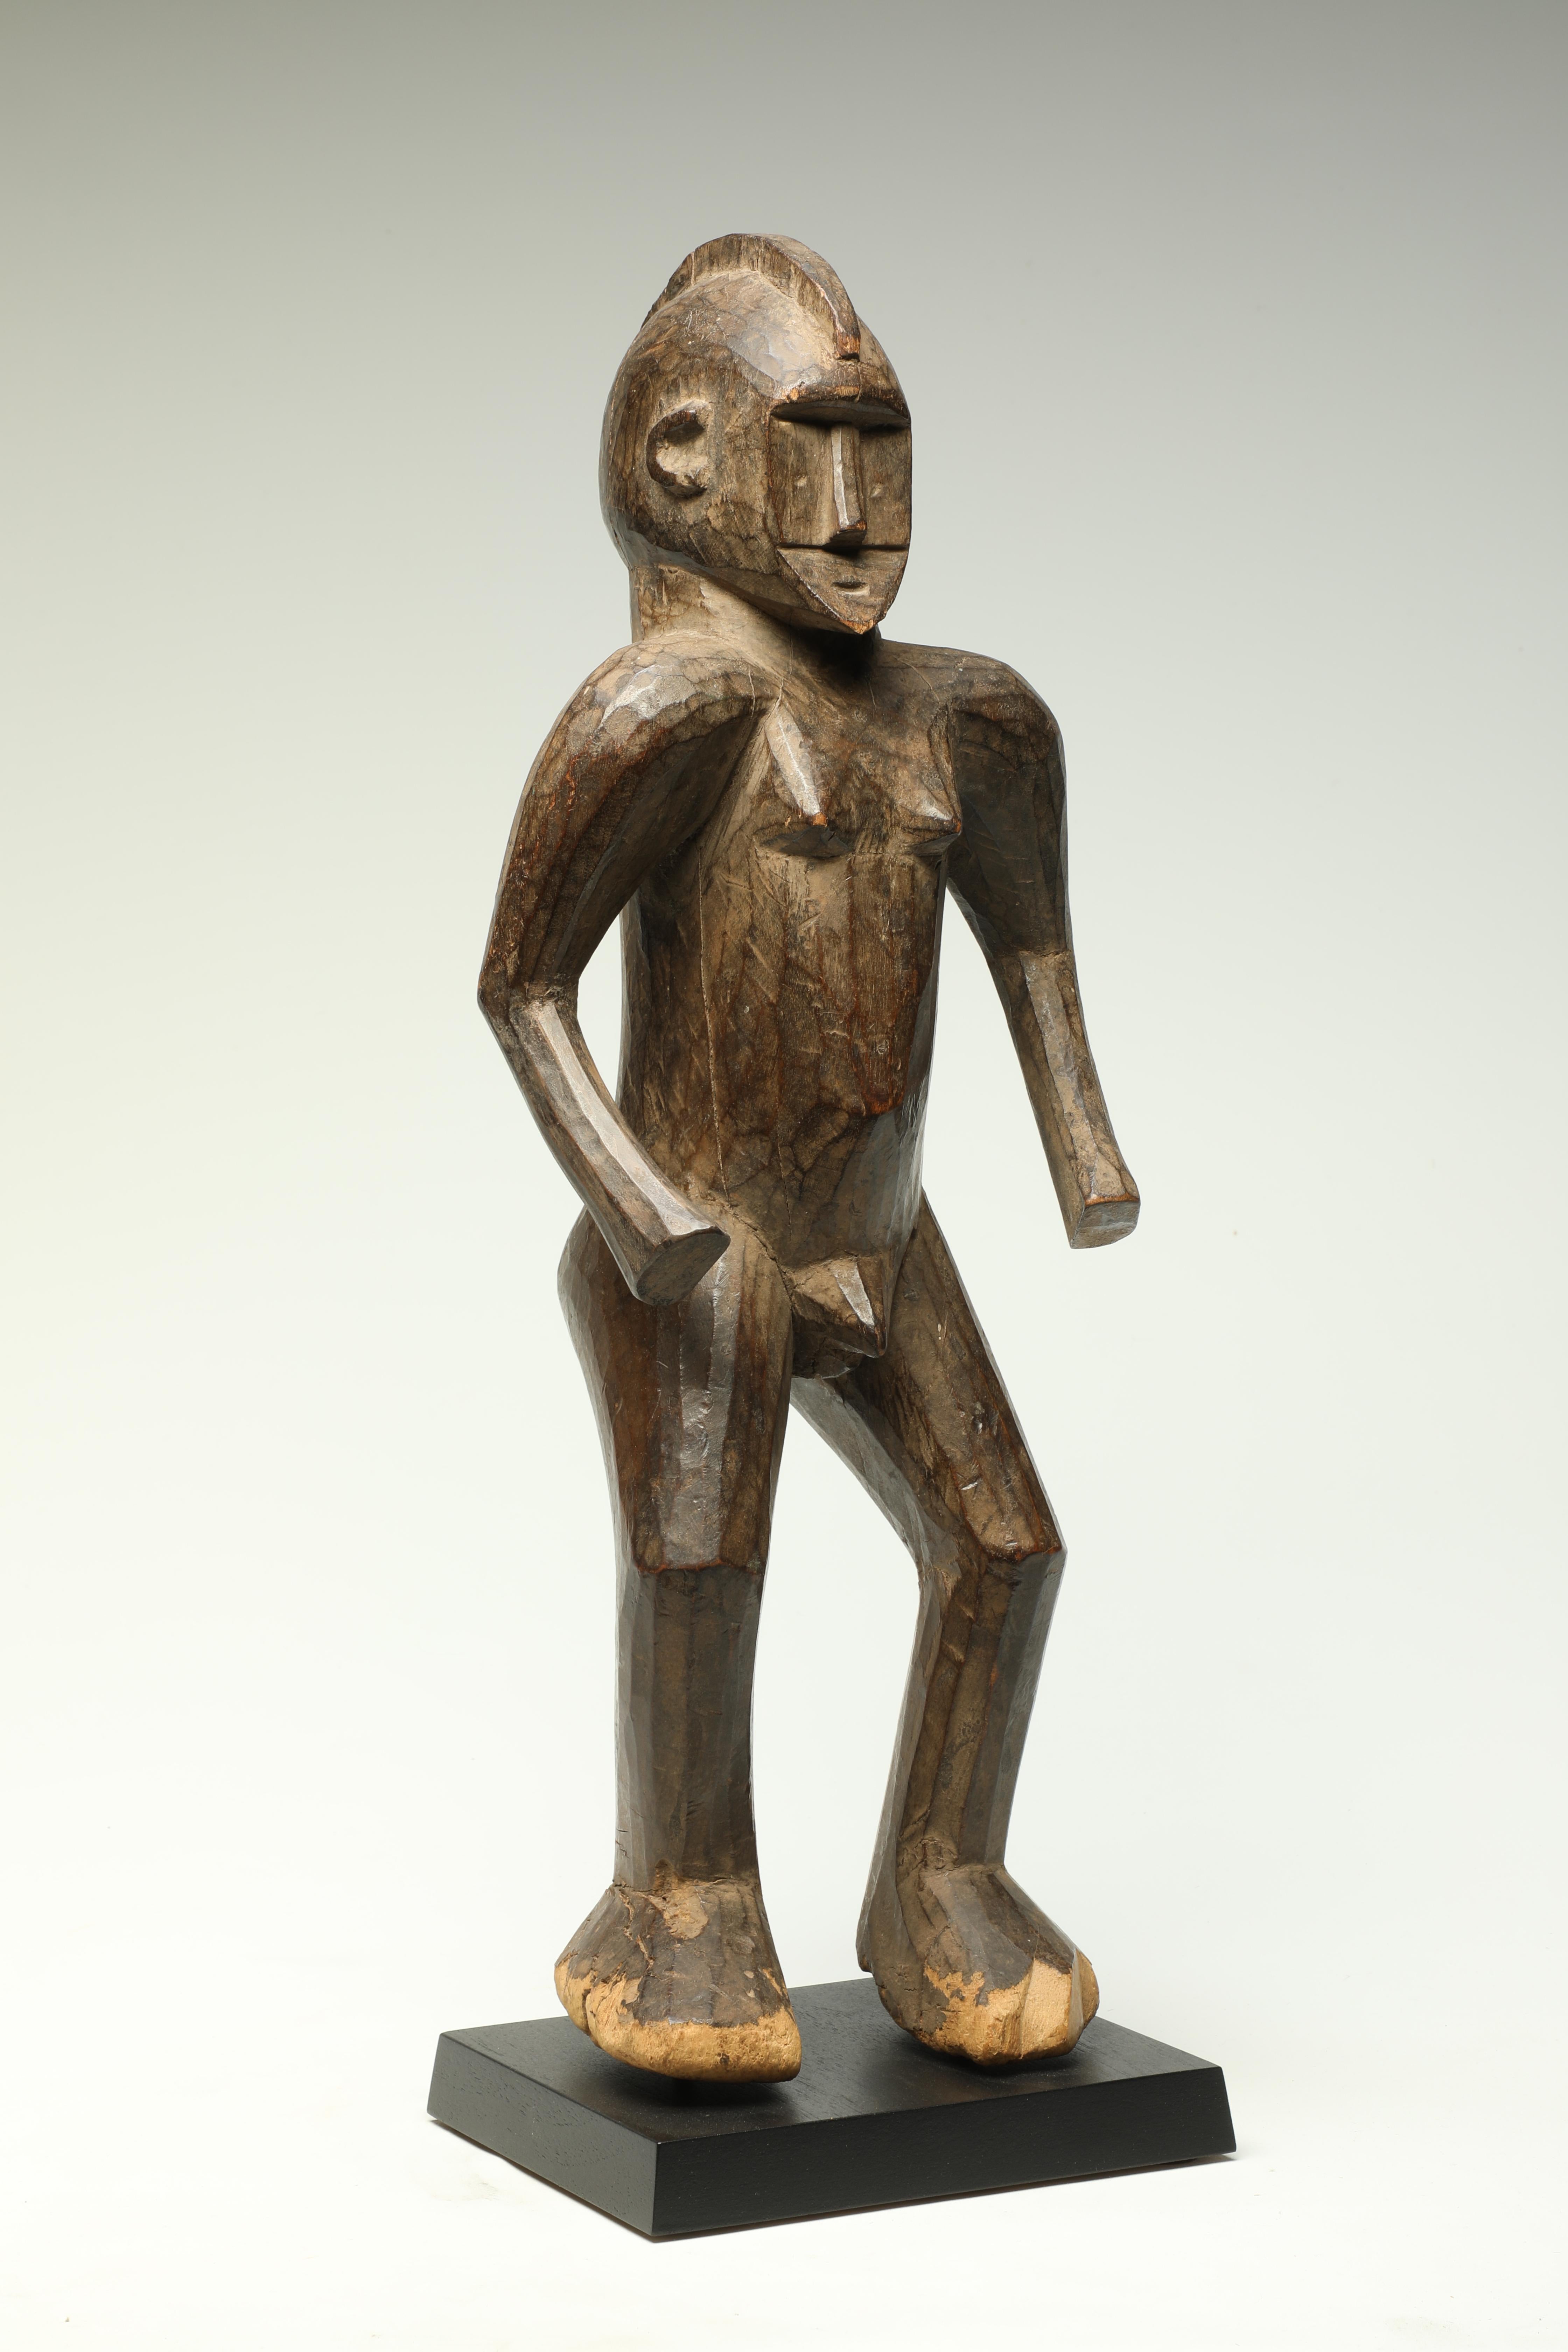 Powerful early cubist carved wood standing female figure from the Bobo-Fing of Burkina Faso, Africa. Created early 20th century. Ex private collection Texas, originally acquired from James Willis Tribal Art of San Francisco, CA in the early 1970s.